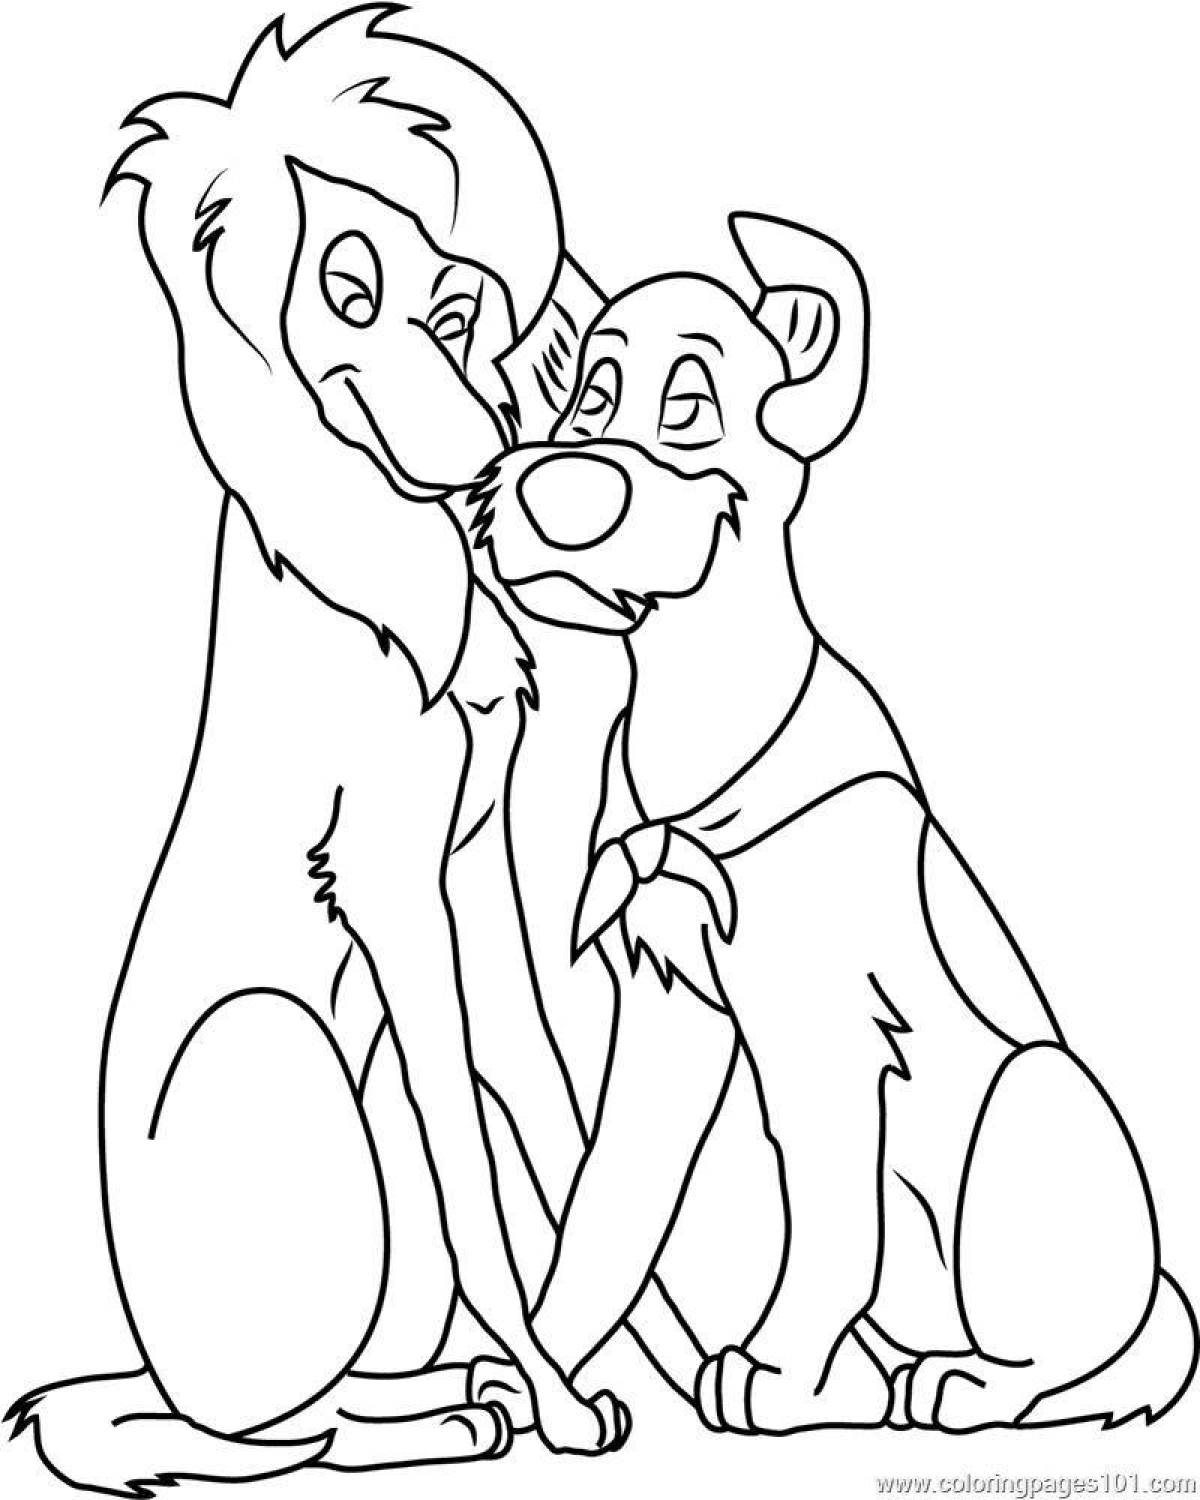 Cute oliver and company coloring